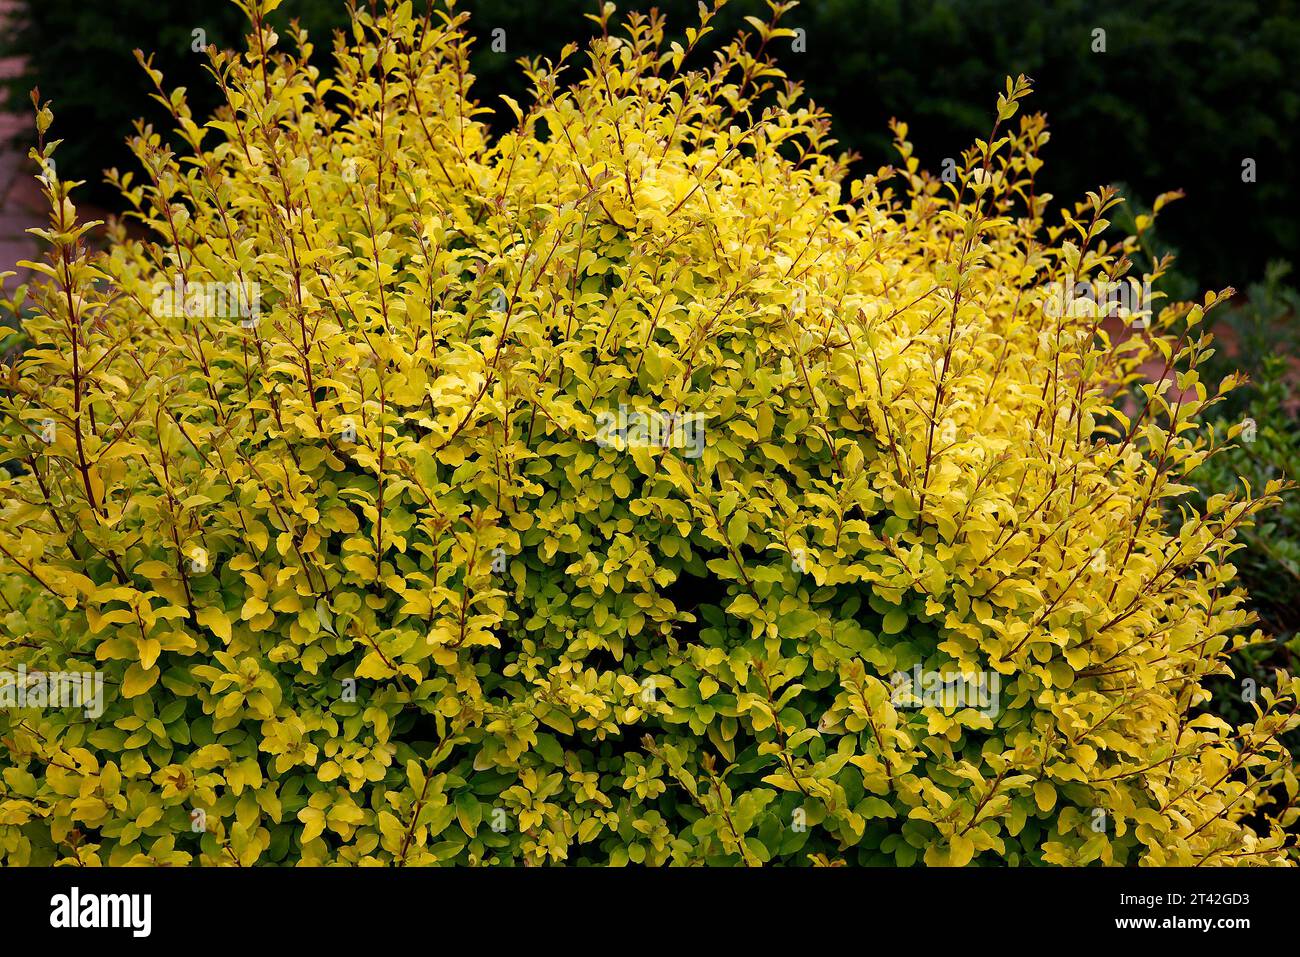 Closeup of the dense yellow glossy leaves of the perennial garden hedge shrub ligustrum undulatum lemon lime and clippers. Stock Photo